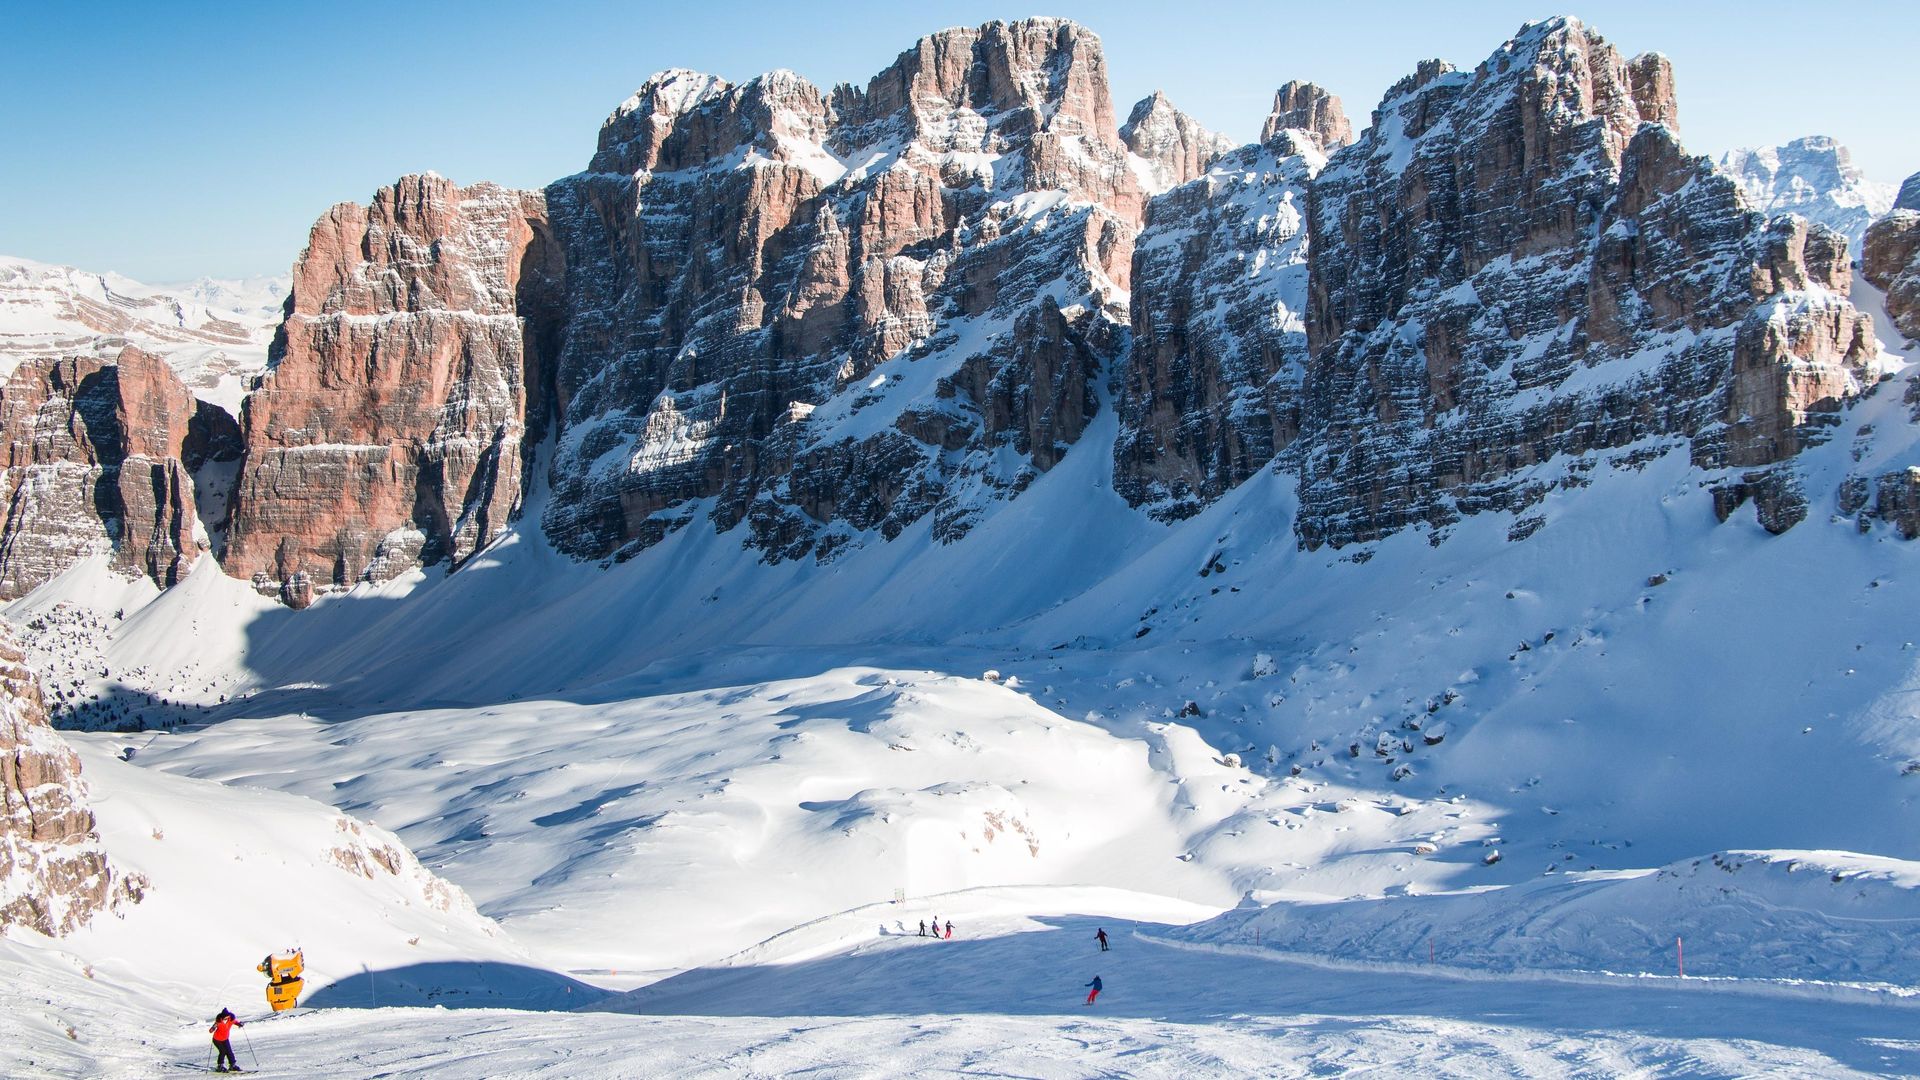 the sella ronda rock, and a piste beneath it, skiers tiny ants on the snow